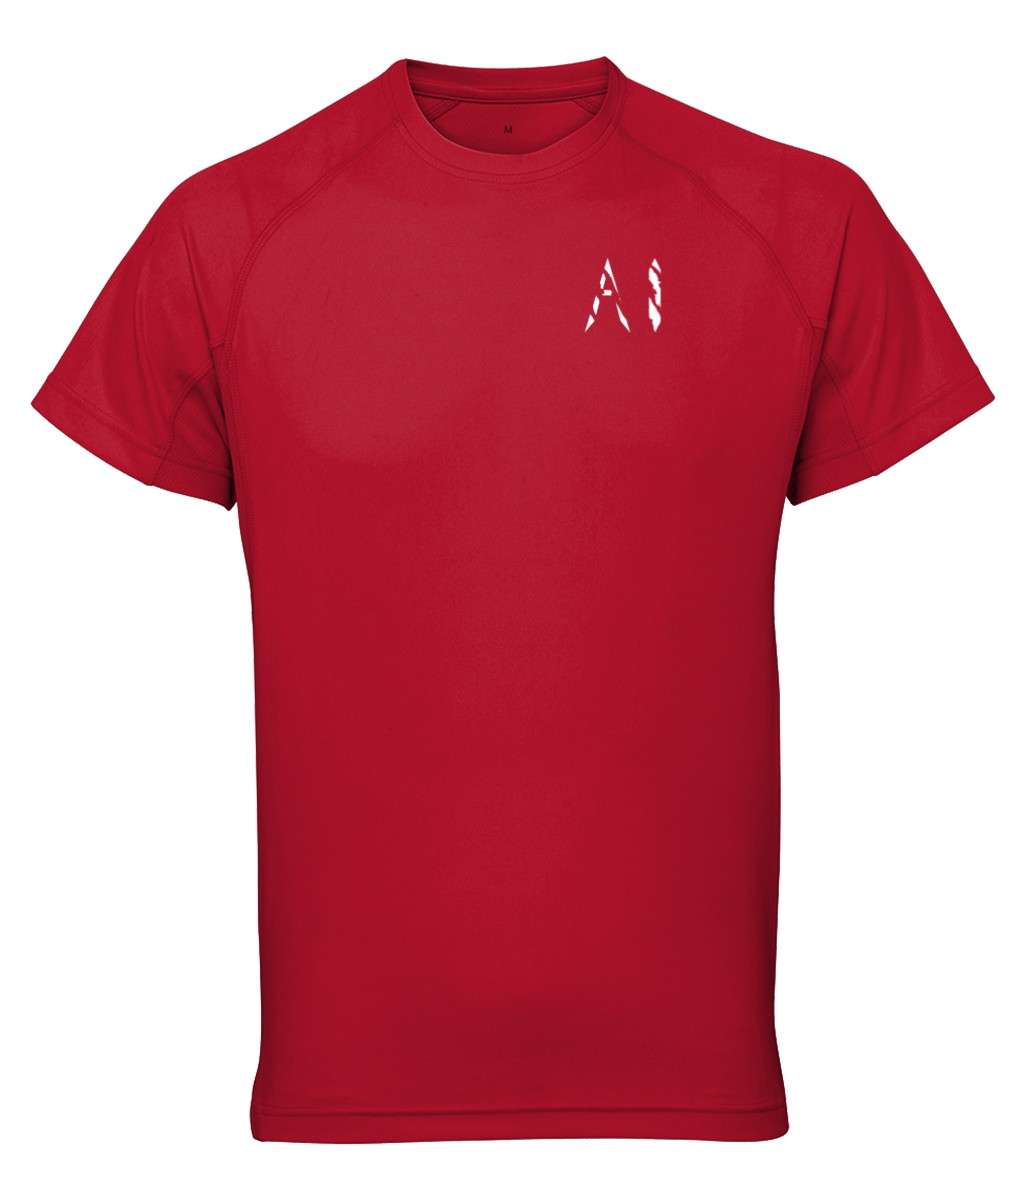 Womens Red Athletic Performance Top with White AI logo on left breast